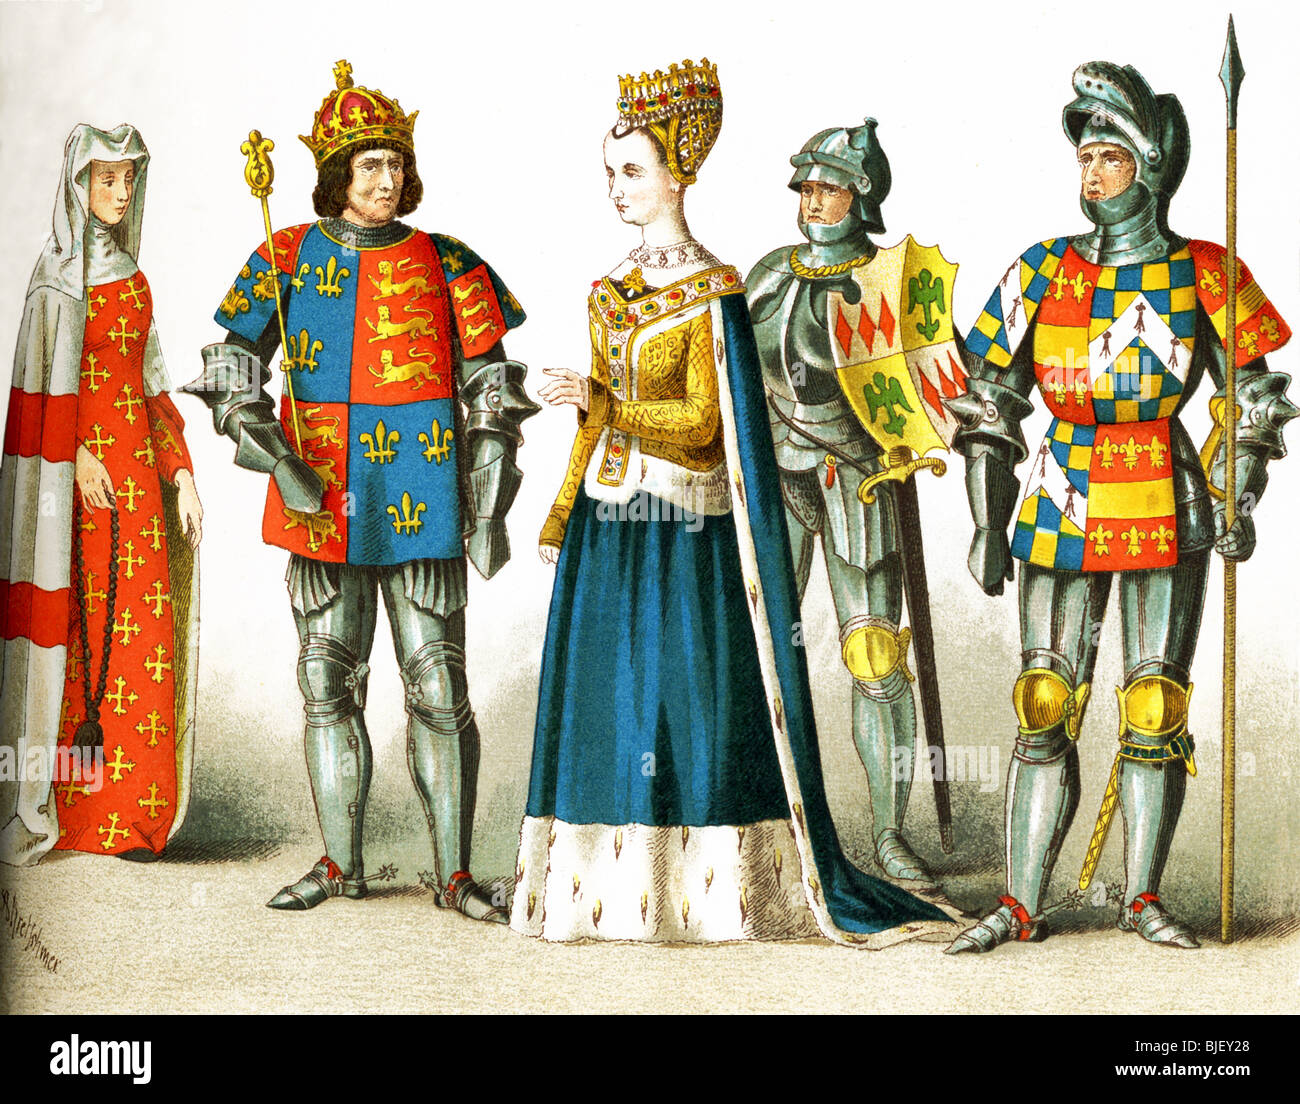 The figures represent, from left to right: a lady of rank, Richard III, Margaret of Scotland, a knight, the Earl of Warwick. Stock Photo